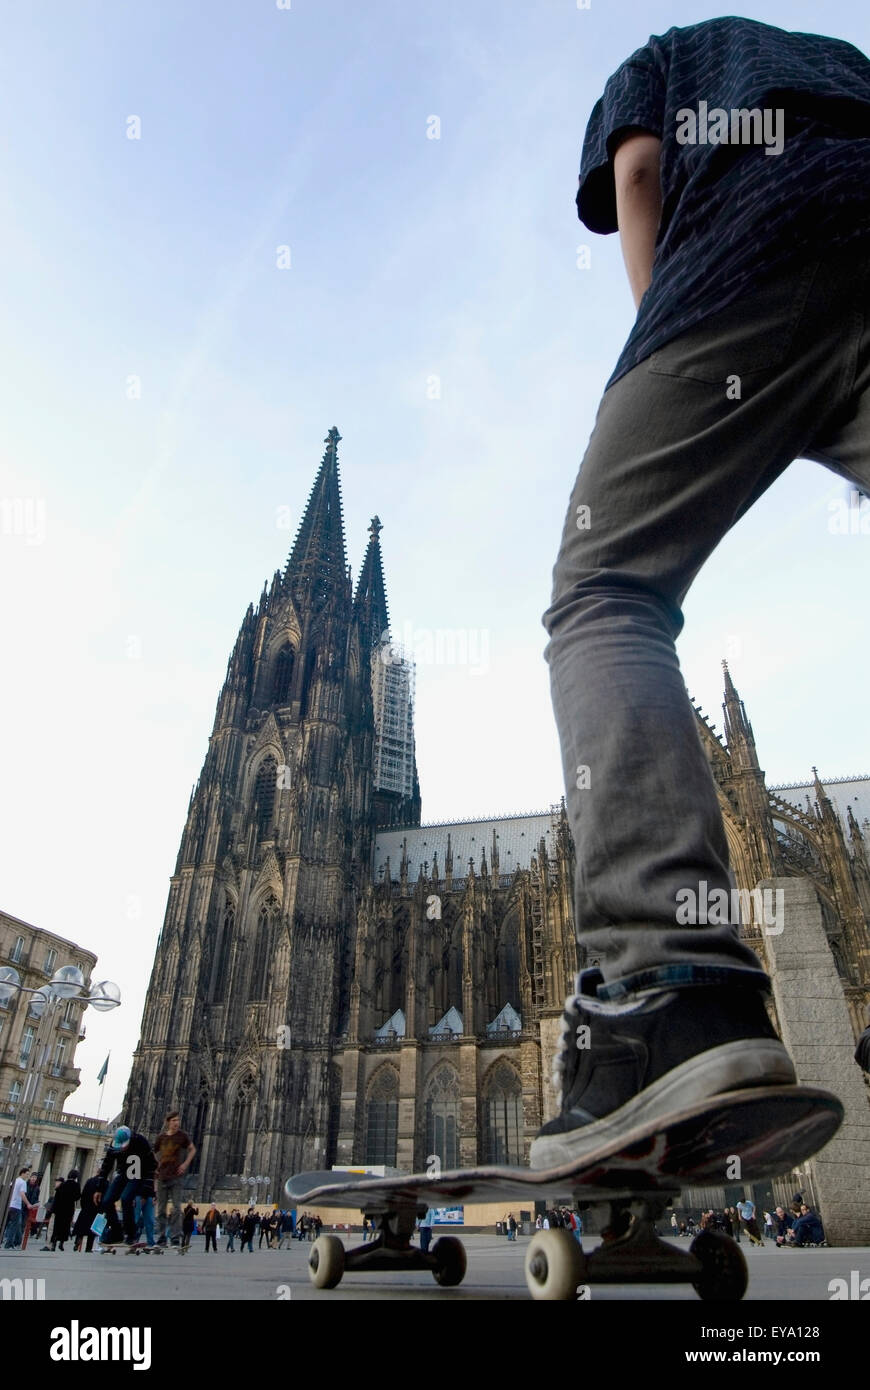 Man Skateboarding Near Cologne Cathedral (Kolner Dom),Low Angle View, Cologne,Germany Stock Photo